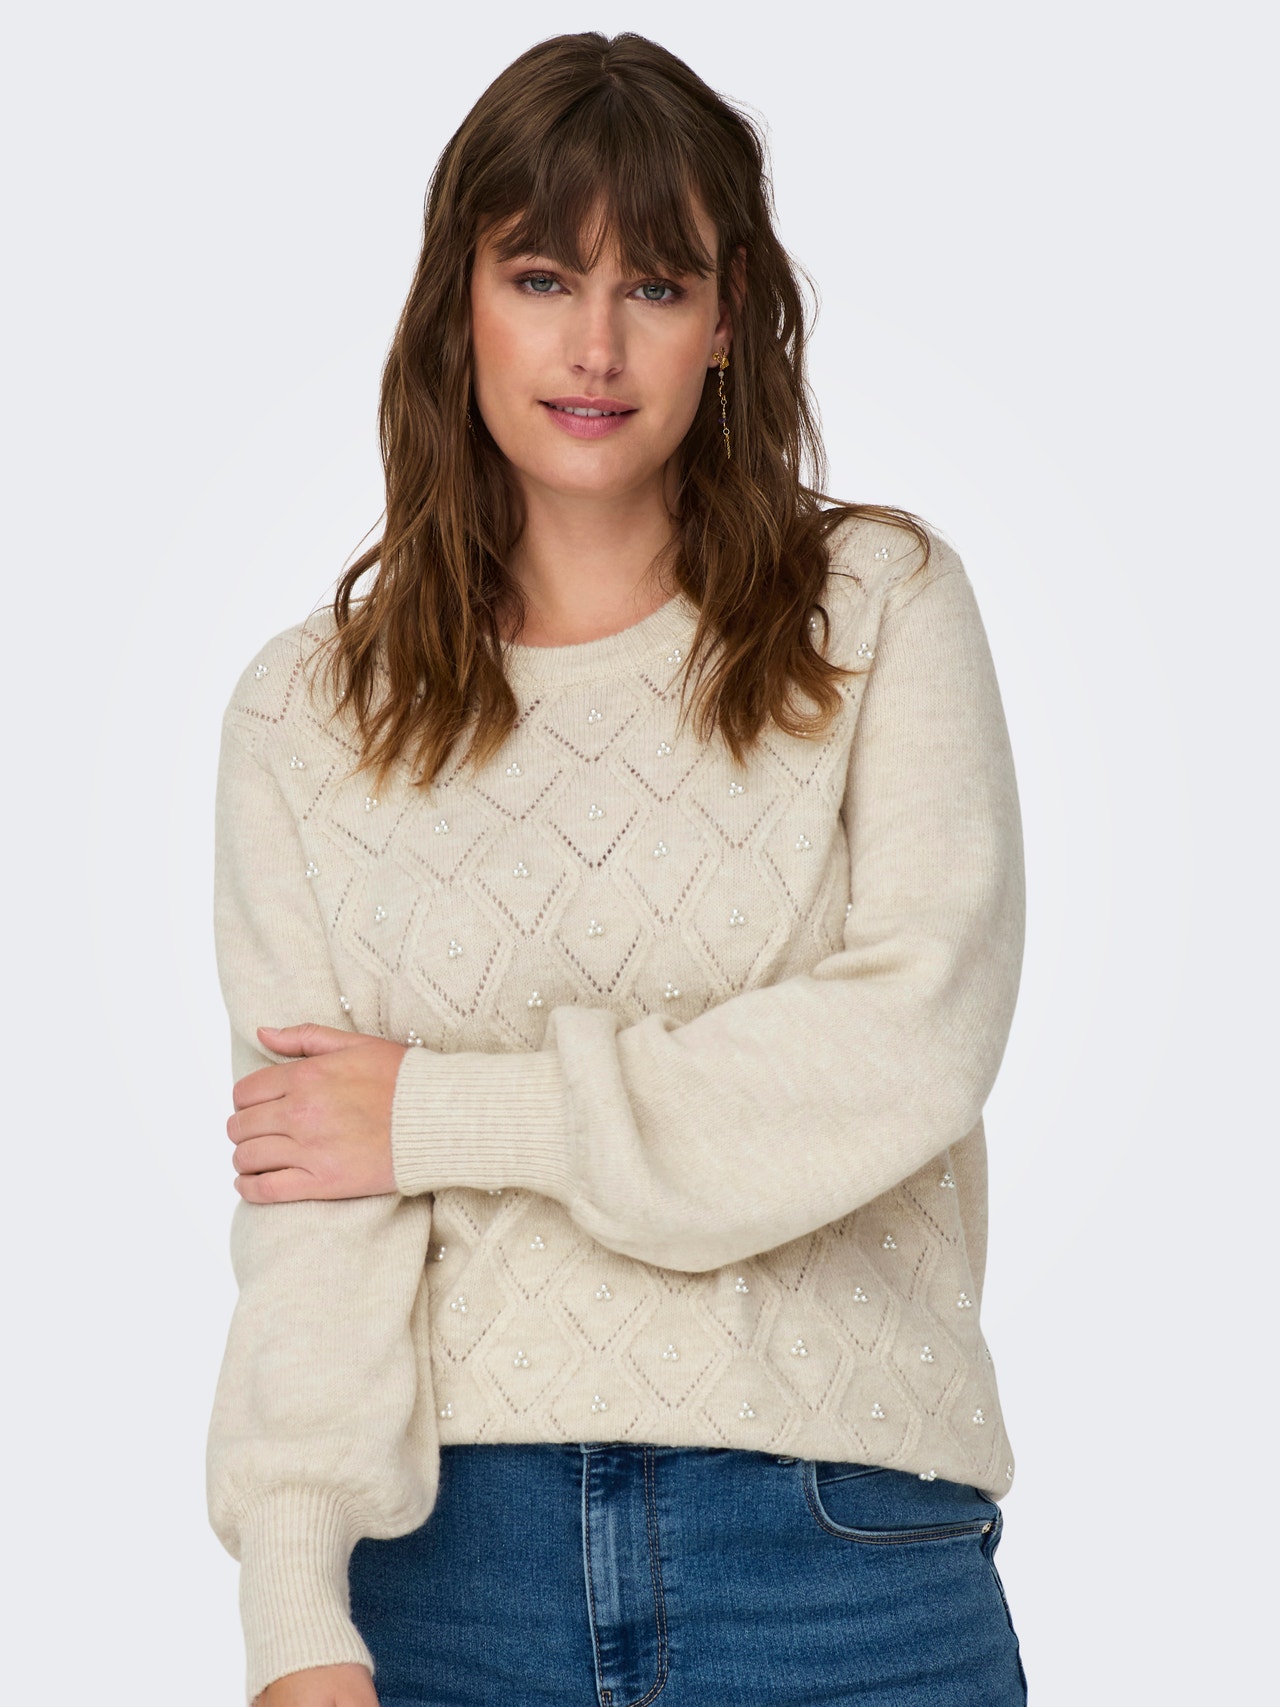 ONLY O-Neck Curve Pullover -Moonbeam - 15296170